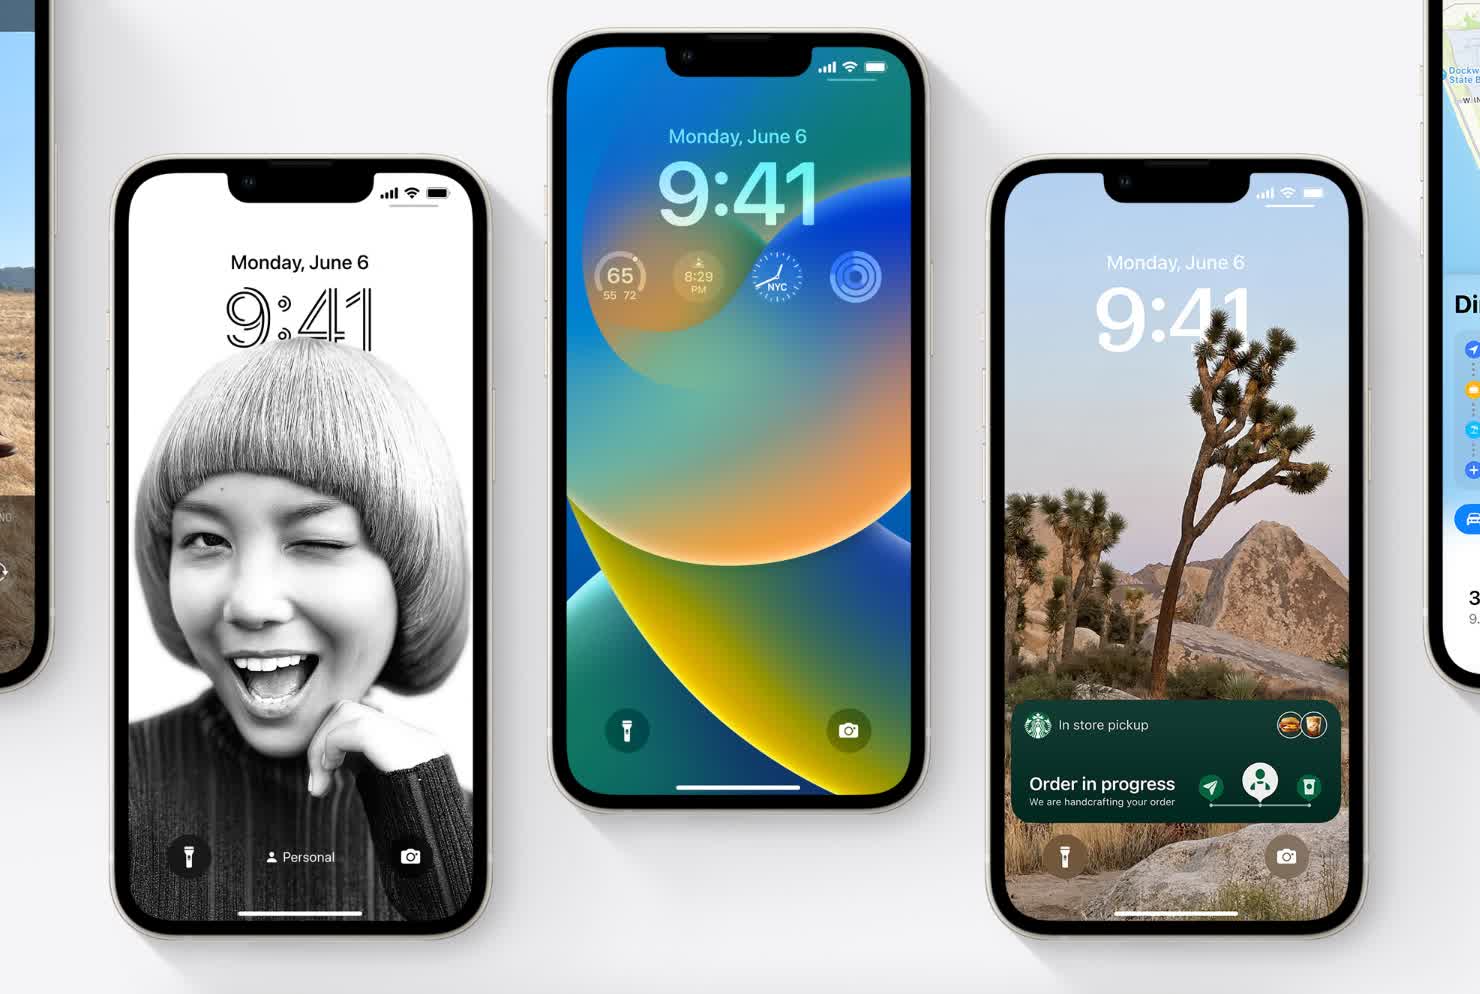 iOS 16 wallpaper modes hint at iPhone 14's always-on screen | TechSpot